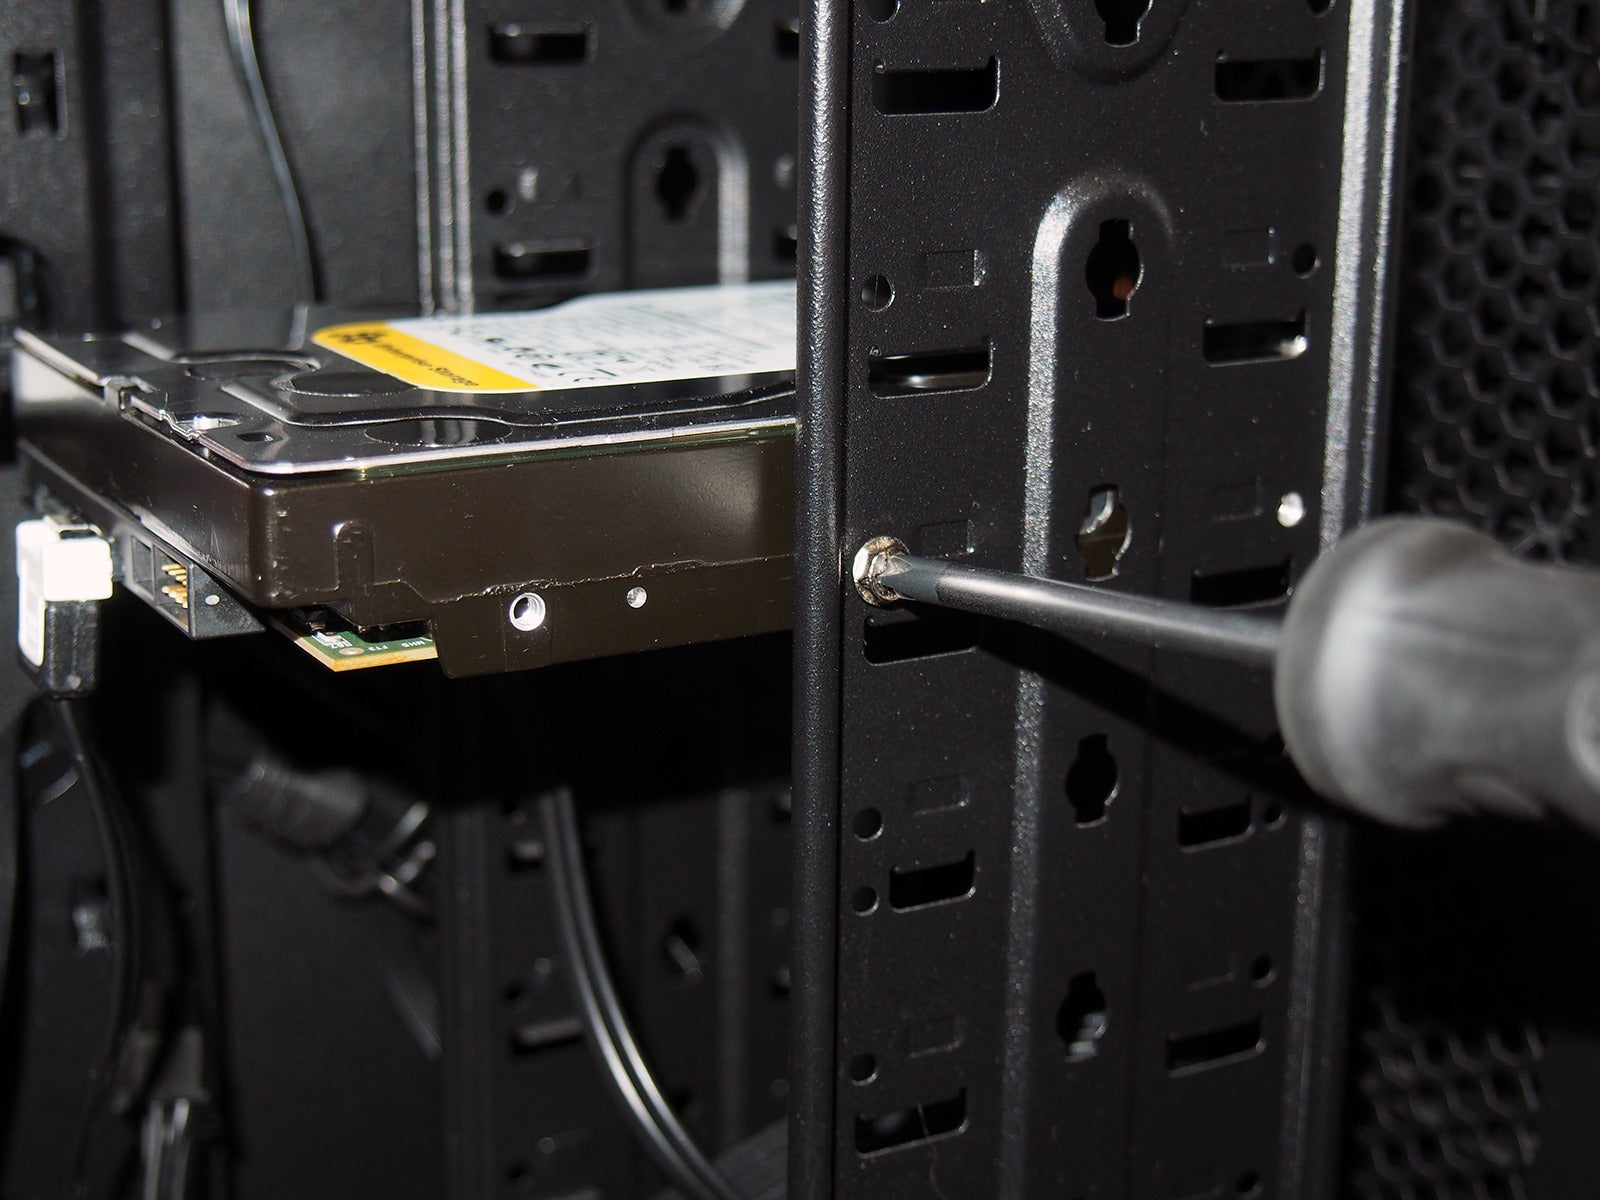 How To Mount A Hard Drive In A PC Case